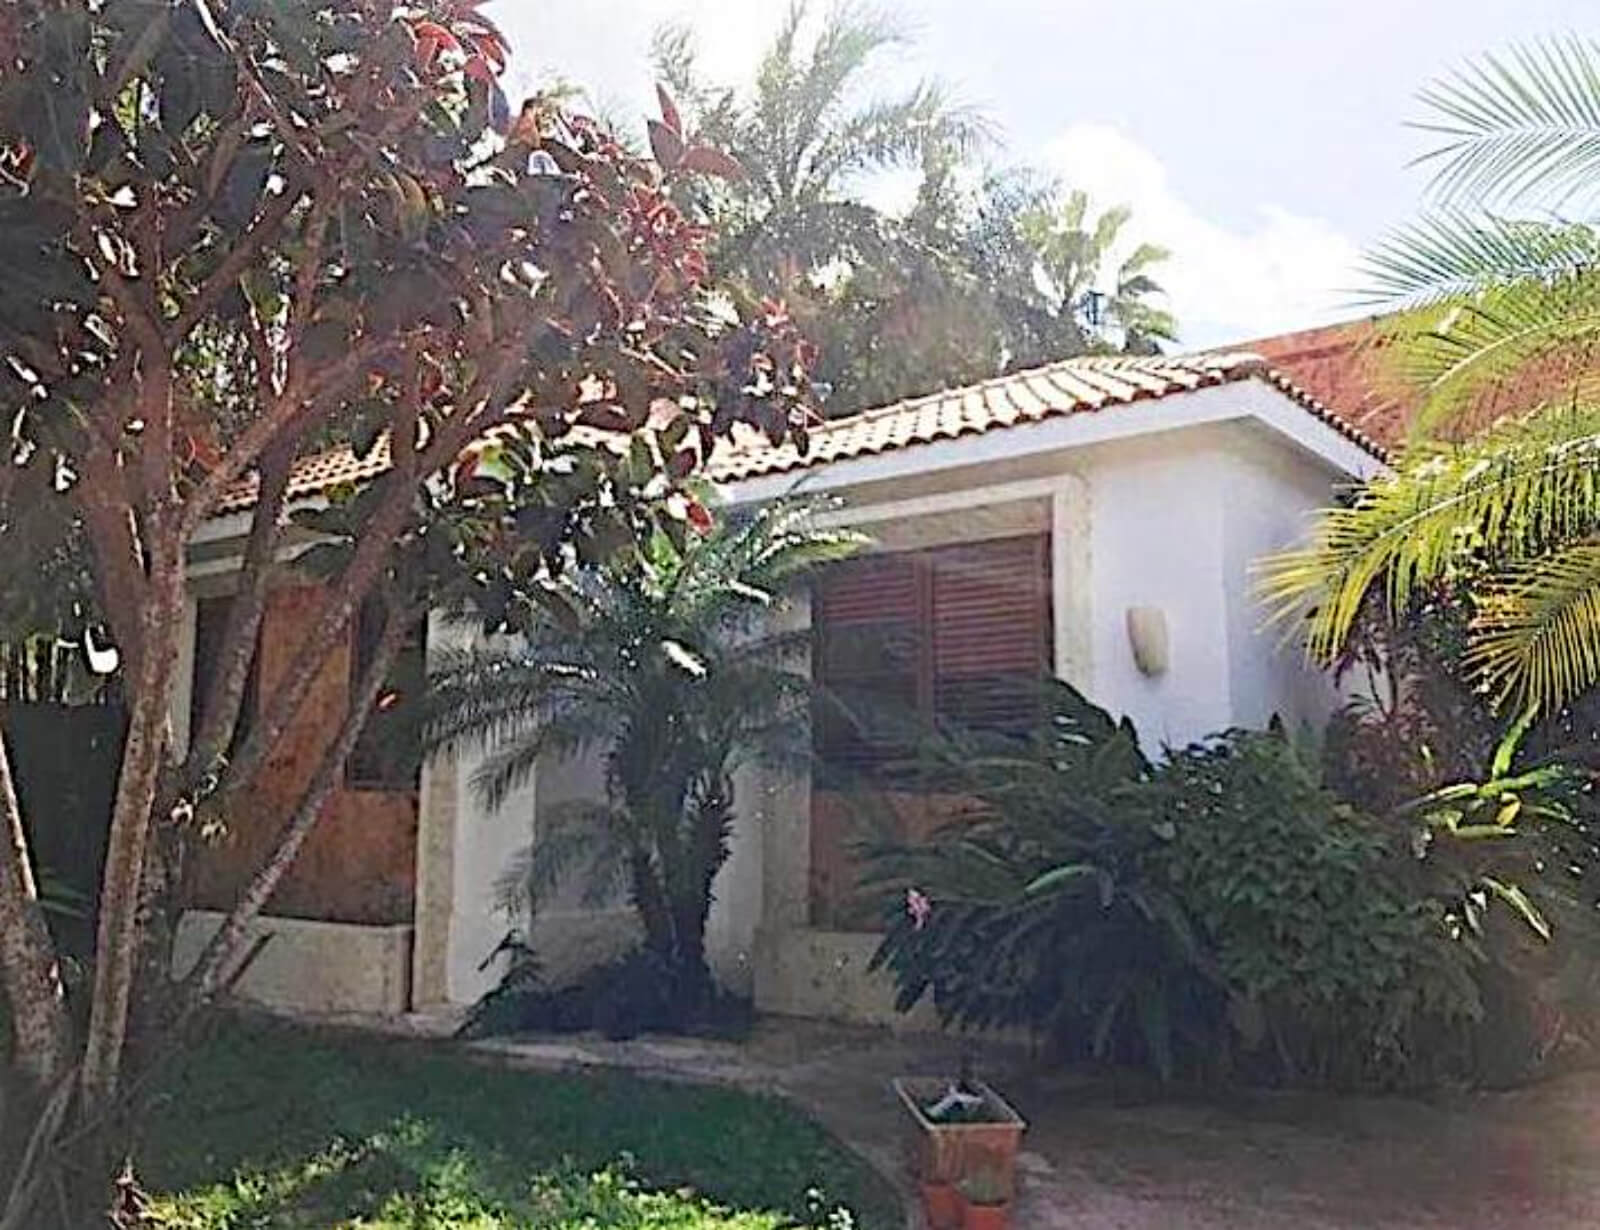 House with private pool, rooftop, double-height window, pre-construction, for sale in Country Club, Cozumel.